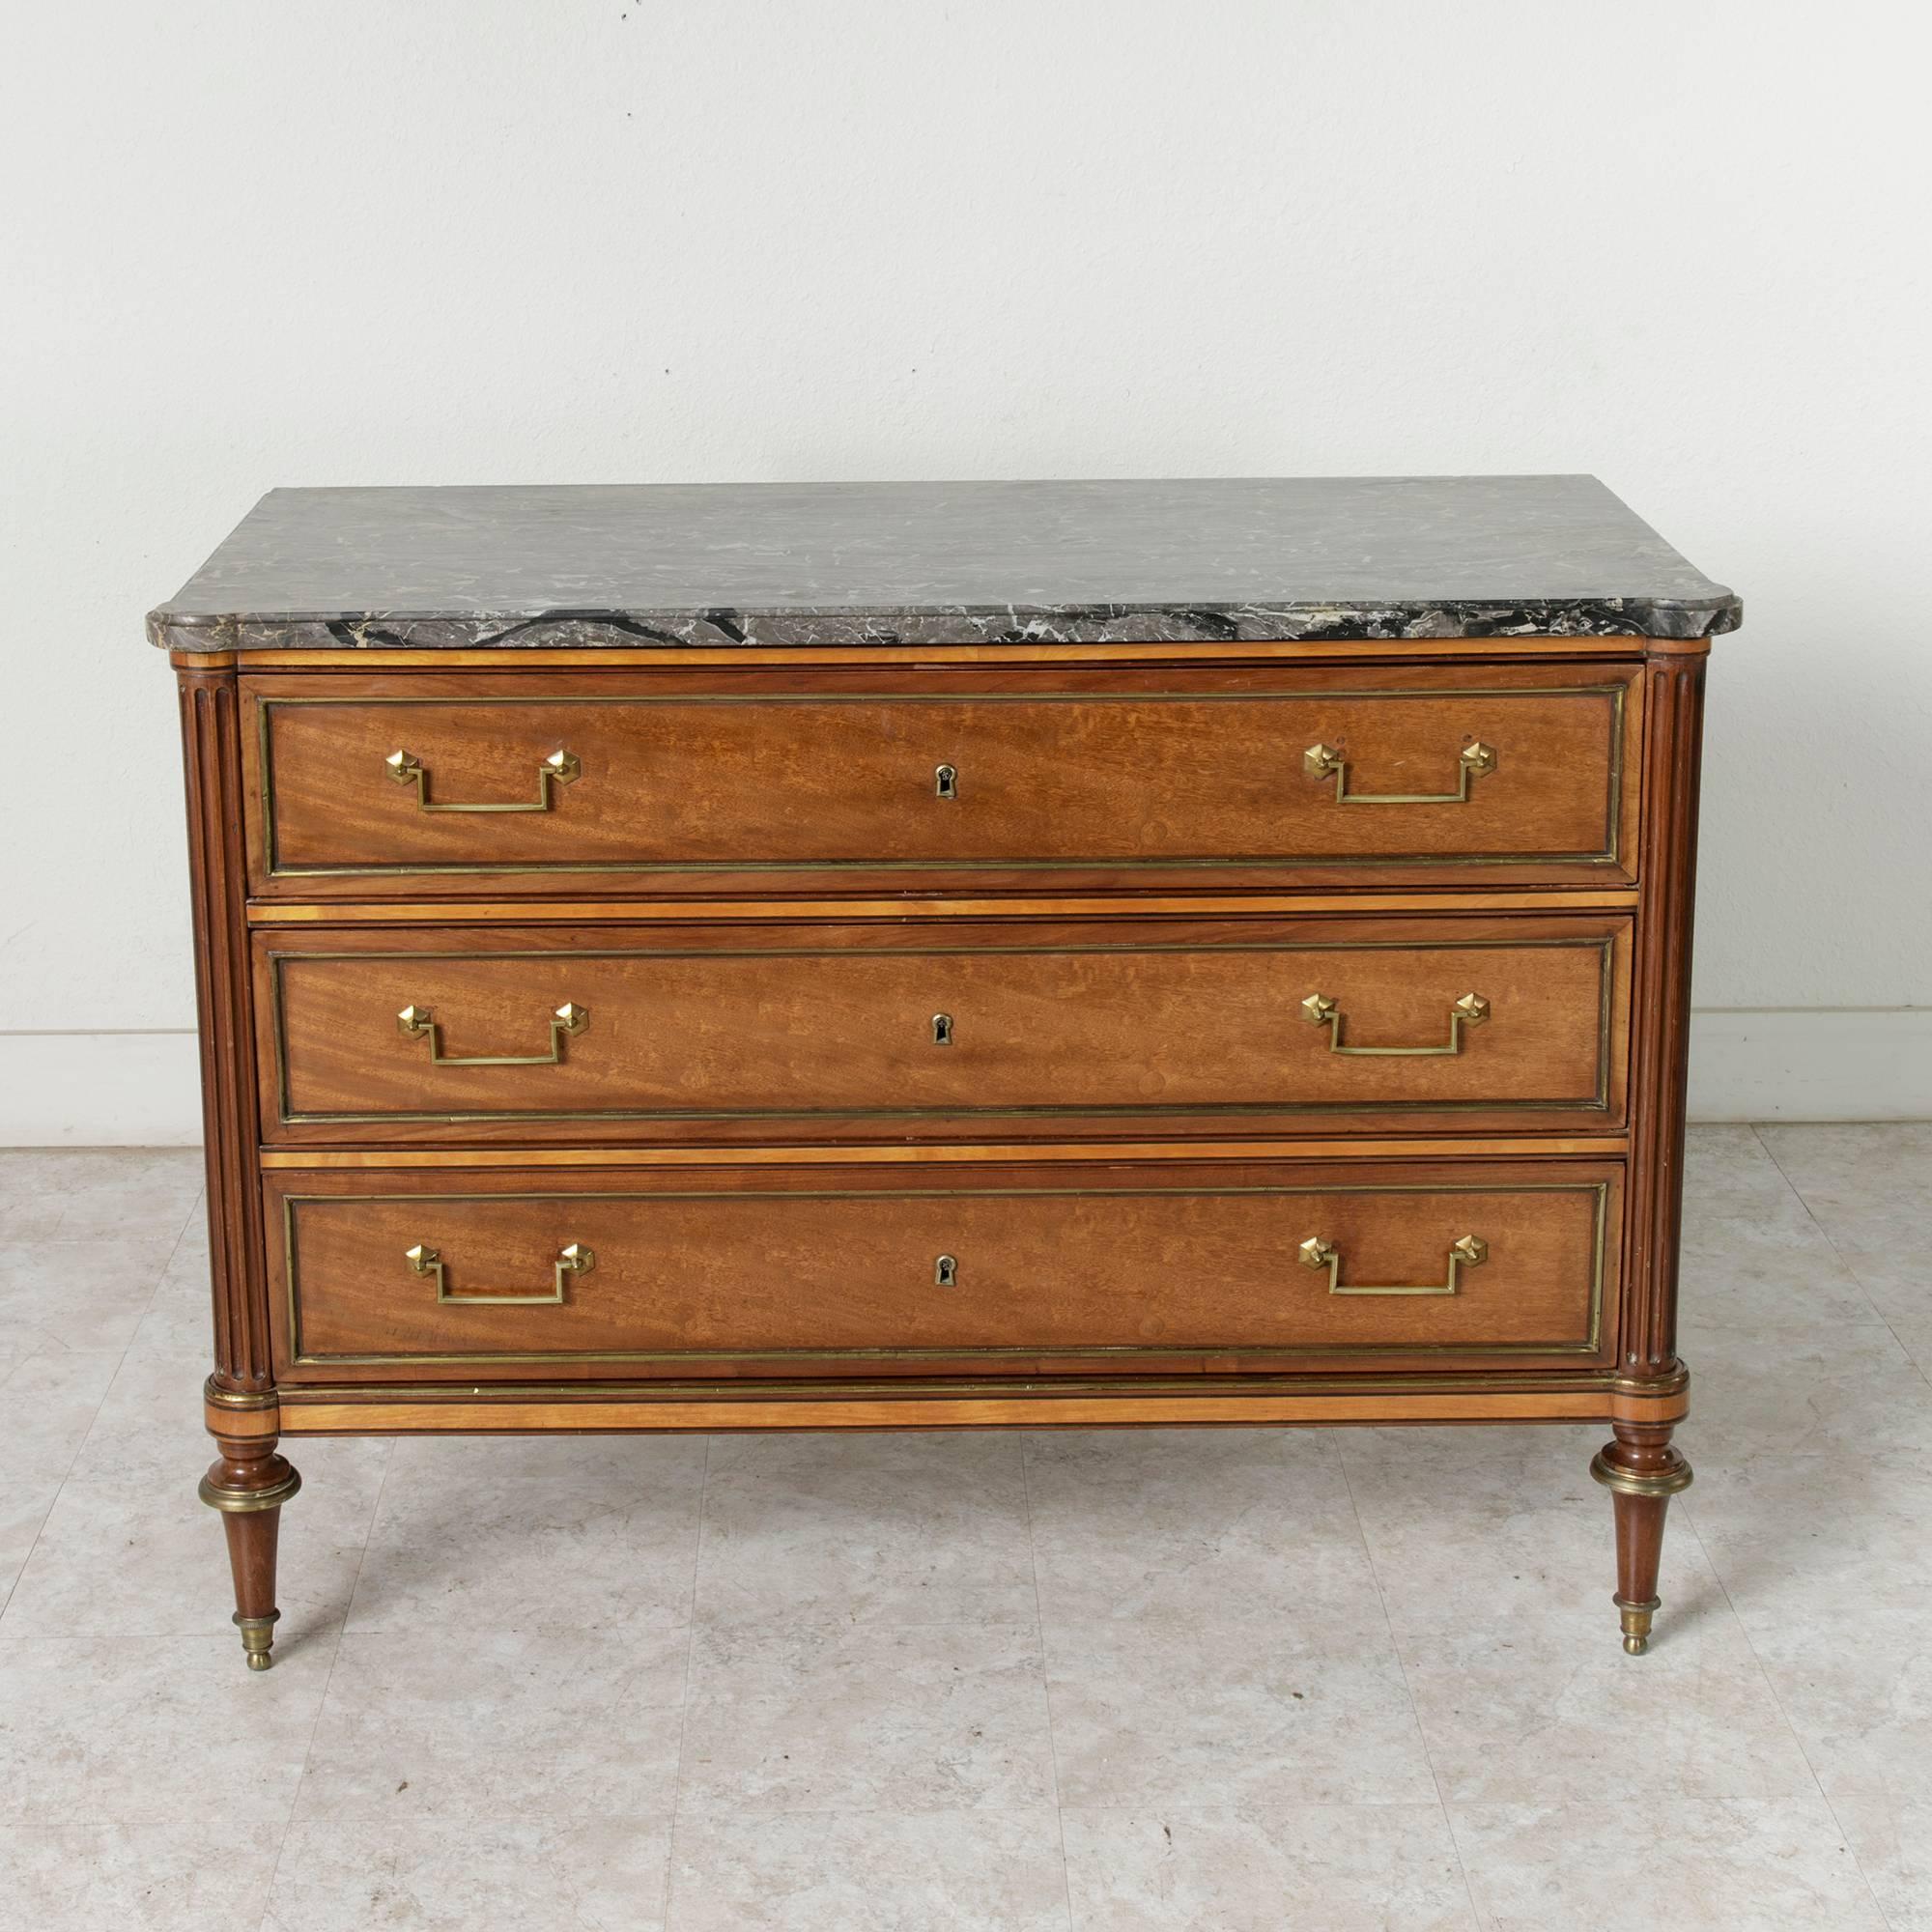 Ready to grace a room with its refined, straight lines, this rare Louis XVI period chest features very unusual inlay of Cuban mahogany, lemonwood, and ebony. A unique piece detailed with bronze banding and a turquin blue marble top, its fluted